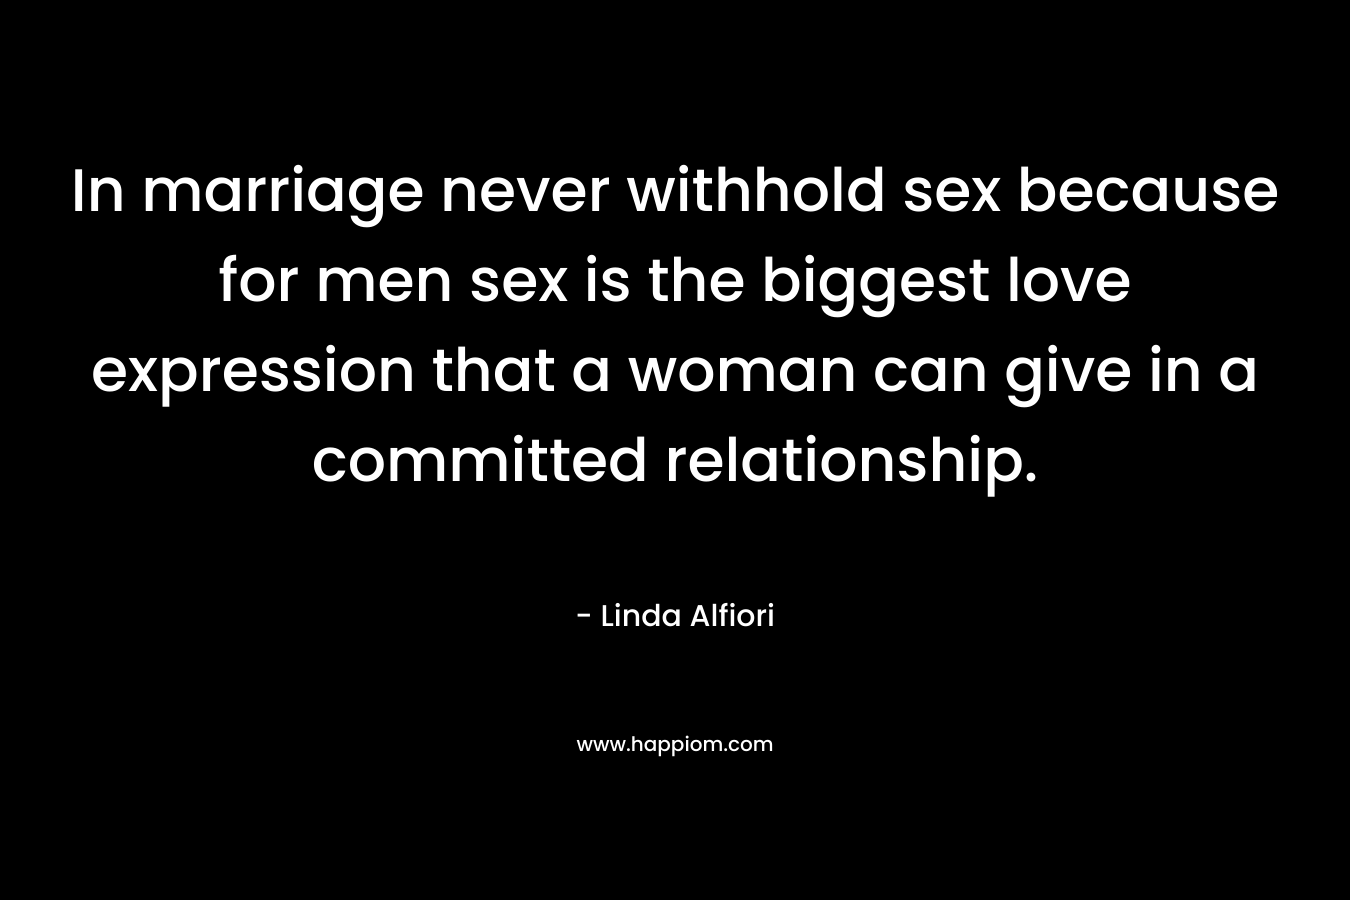 In marriage never withhold sex because for men sex is the biggest love expression that a woman can give in a committed relationship.